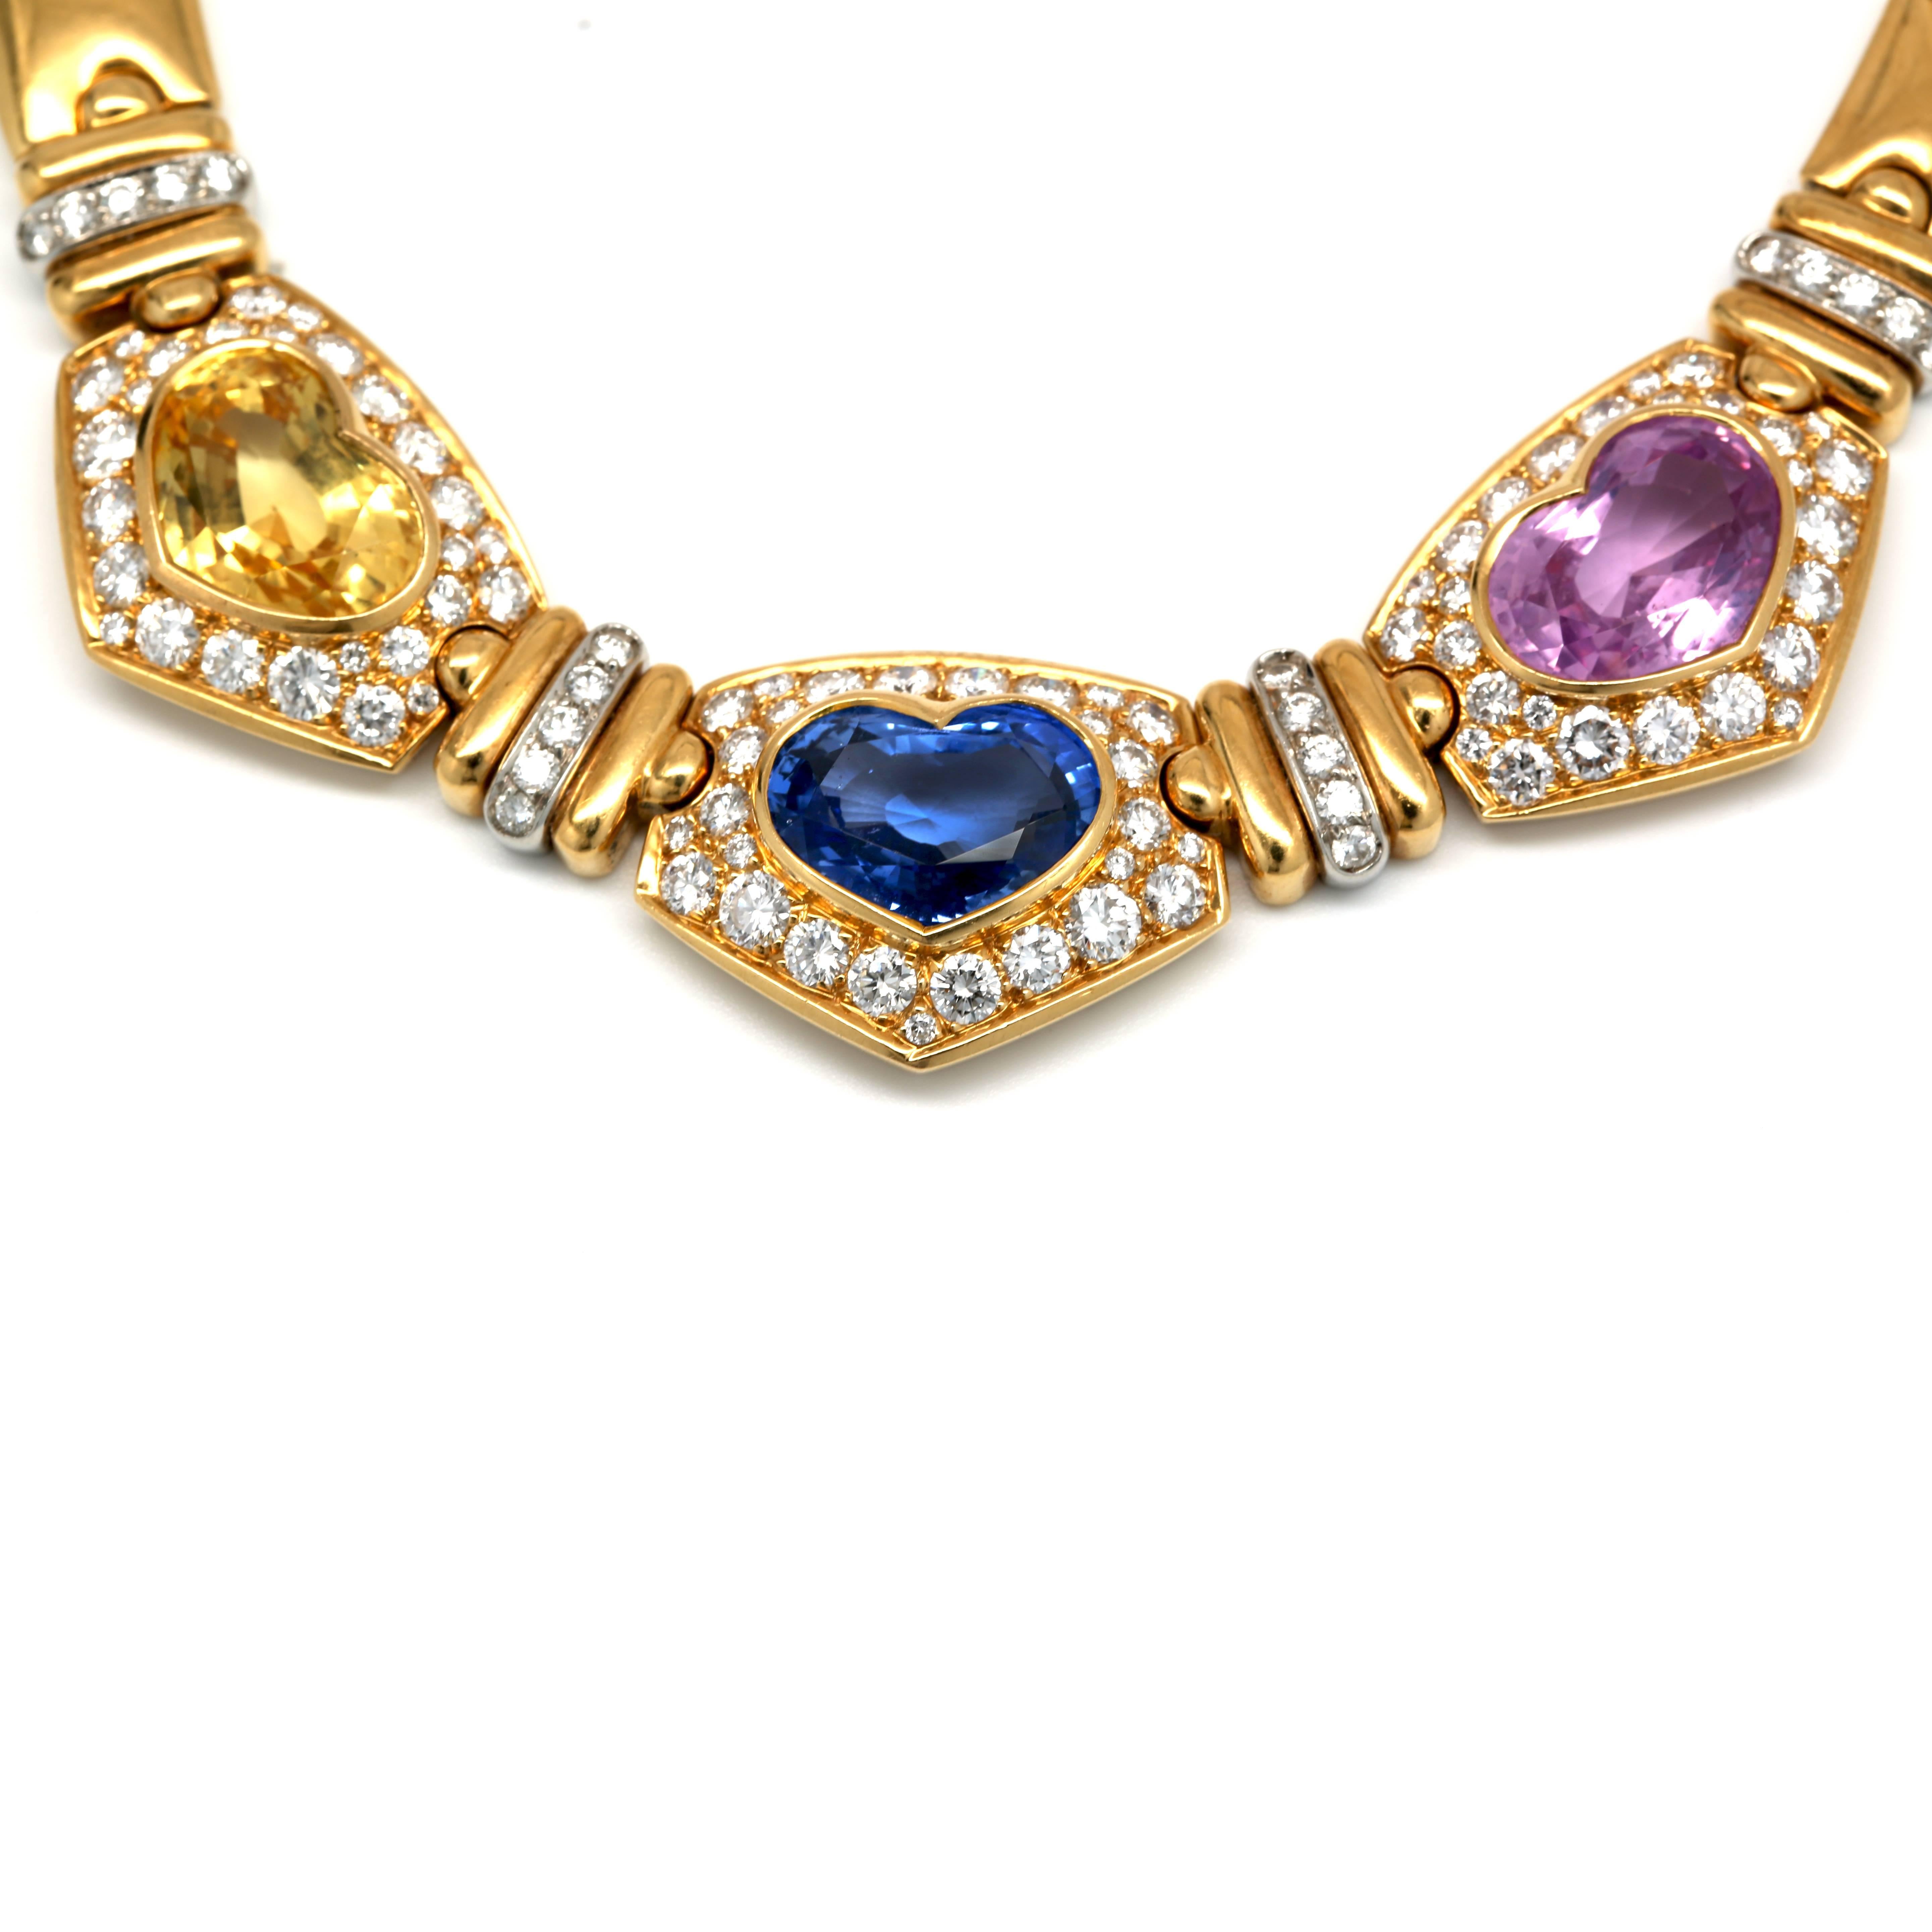 1980's Necklace set with Approx. 6.00 Carats of Collection Quality Diamonds D-E Color VVS-VS Clarity. Featuring 3 Natural Color Sapphires Approx. 28.00 cts Set in 18K Yellow Gold.